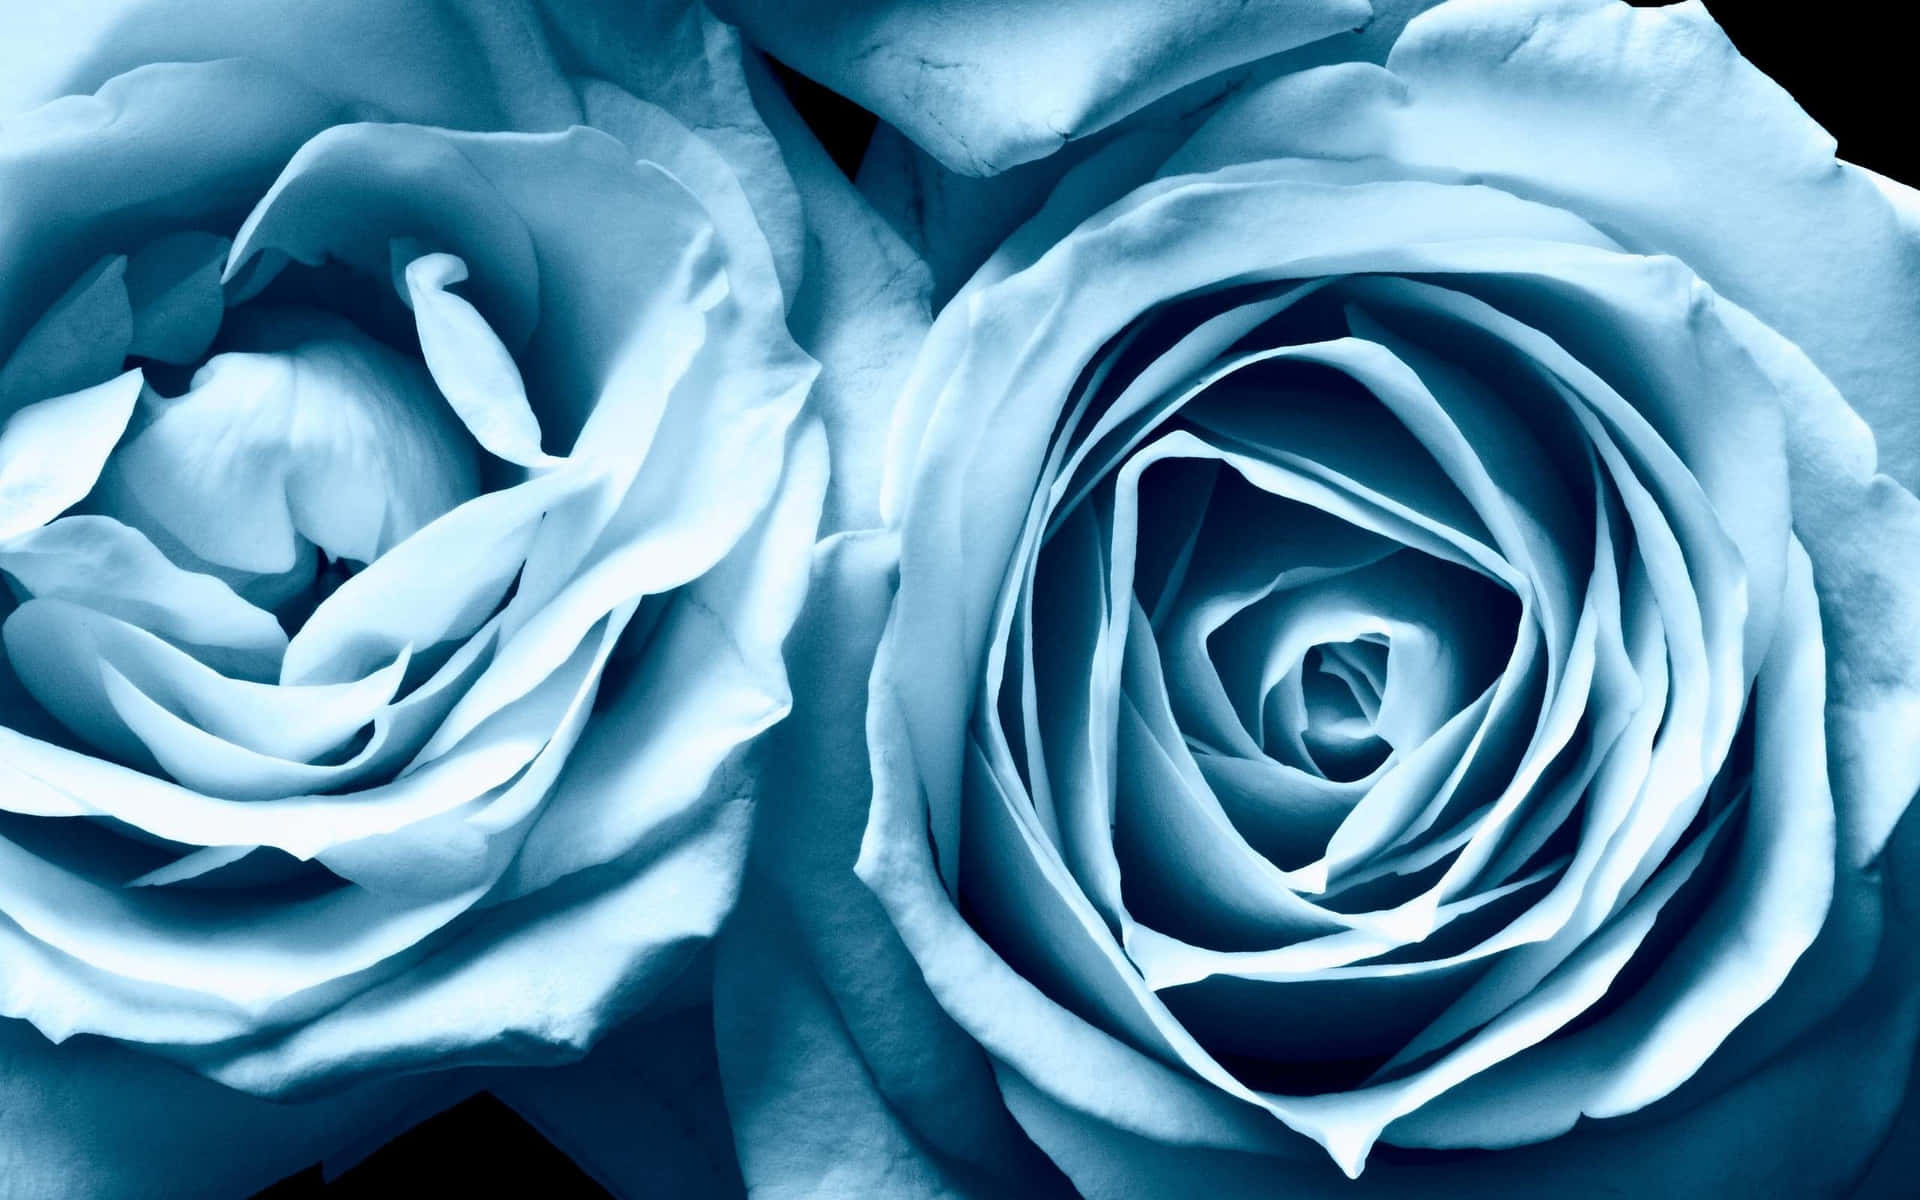 Blue Rose 4K Ultra HD Wallpapers, HD Blue Rose 3840x2160 Backgrounds, Free  Images Download